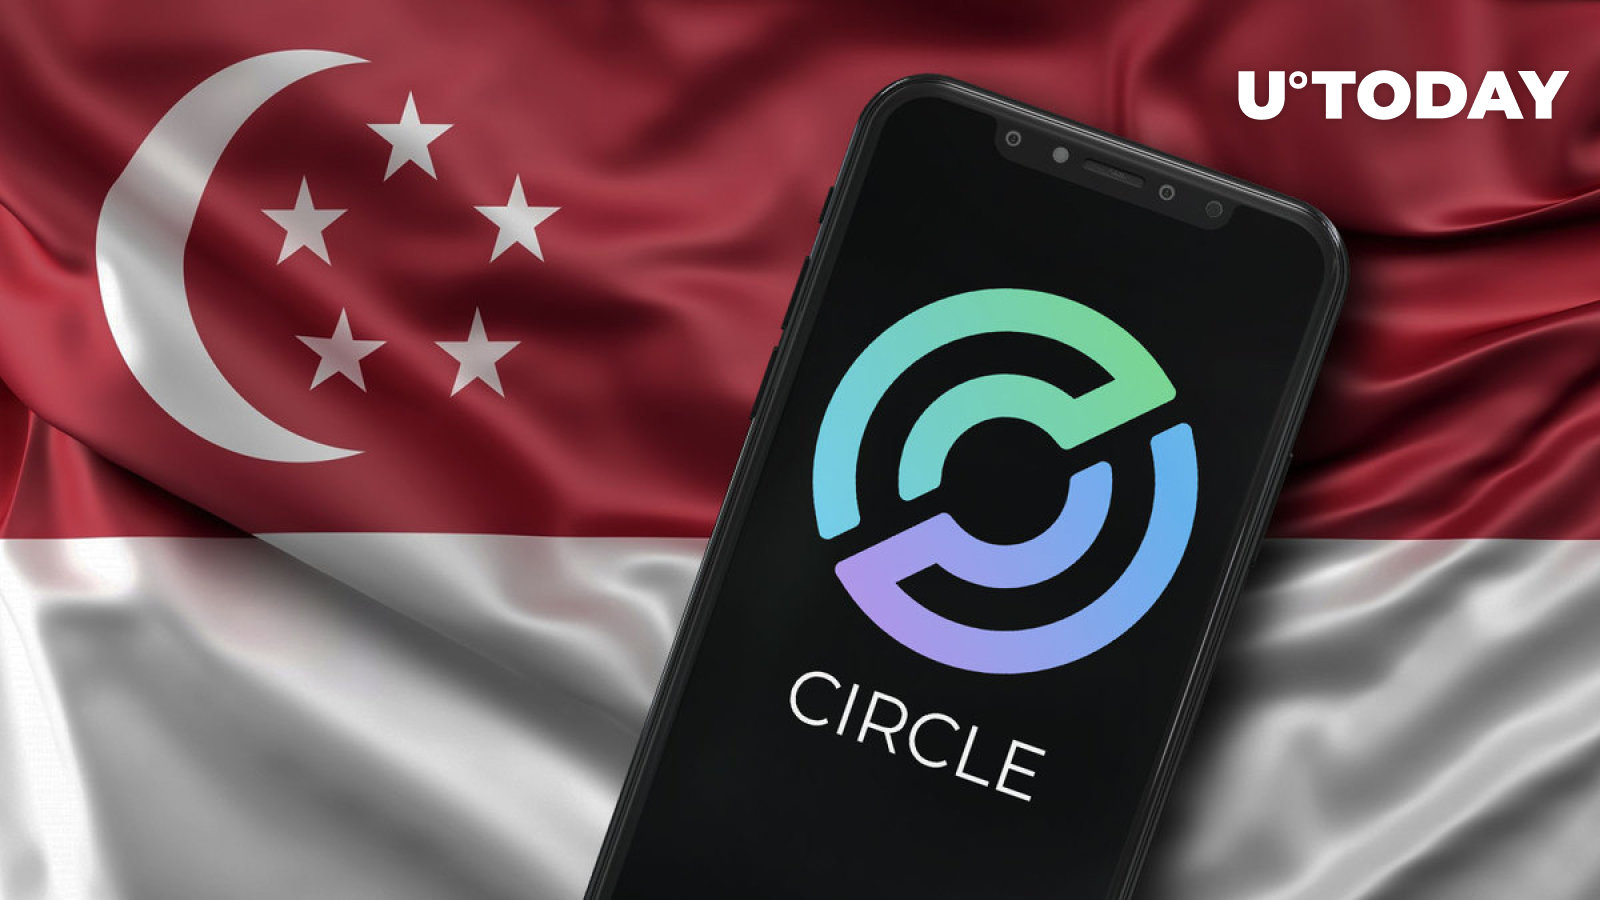 Circle Obtains License in Major World Fintech Hub as SEC Cracks Down on Crypto Yet Again